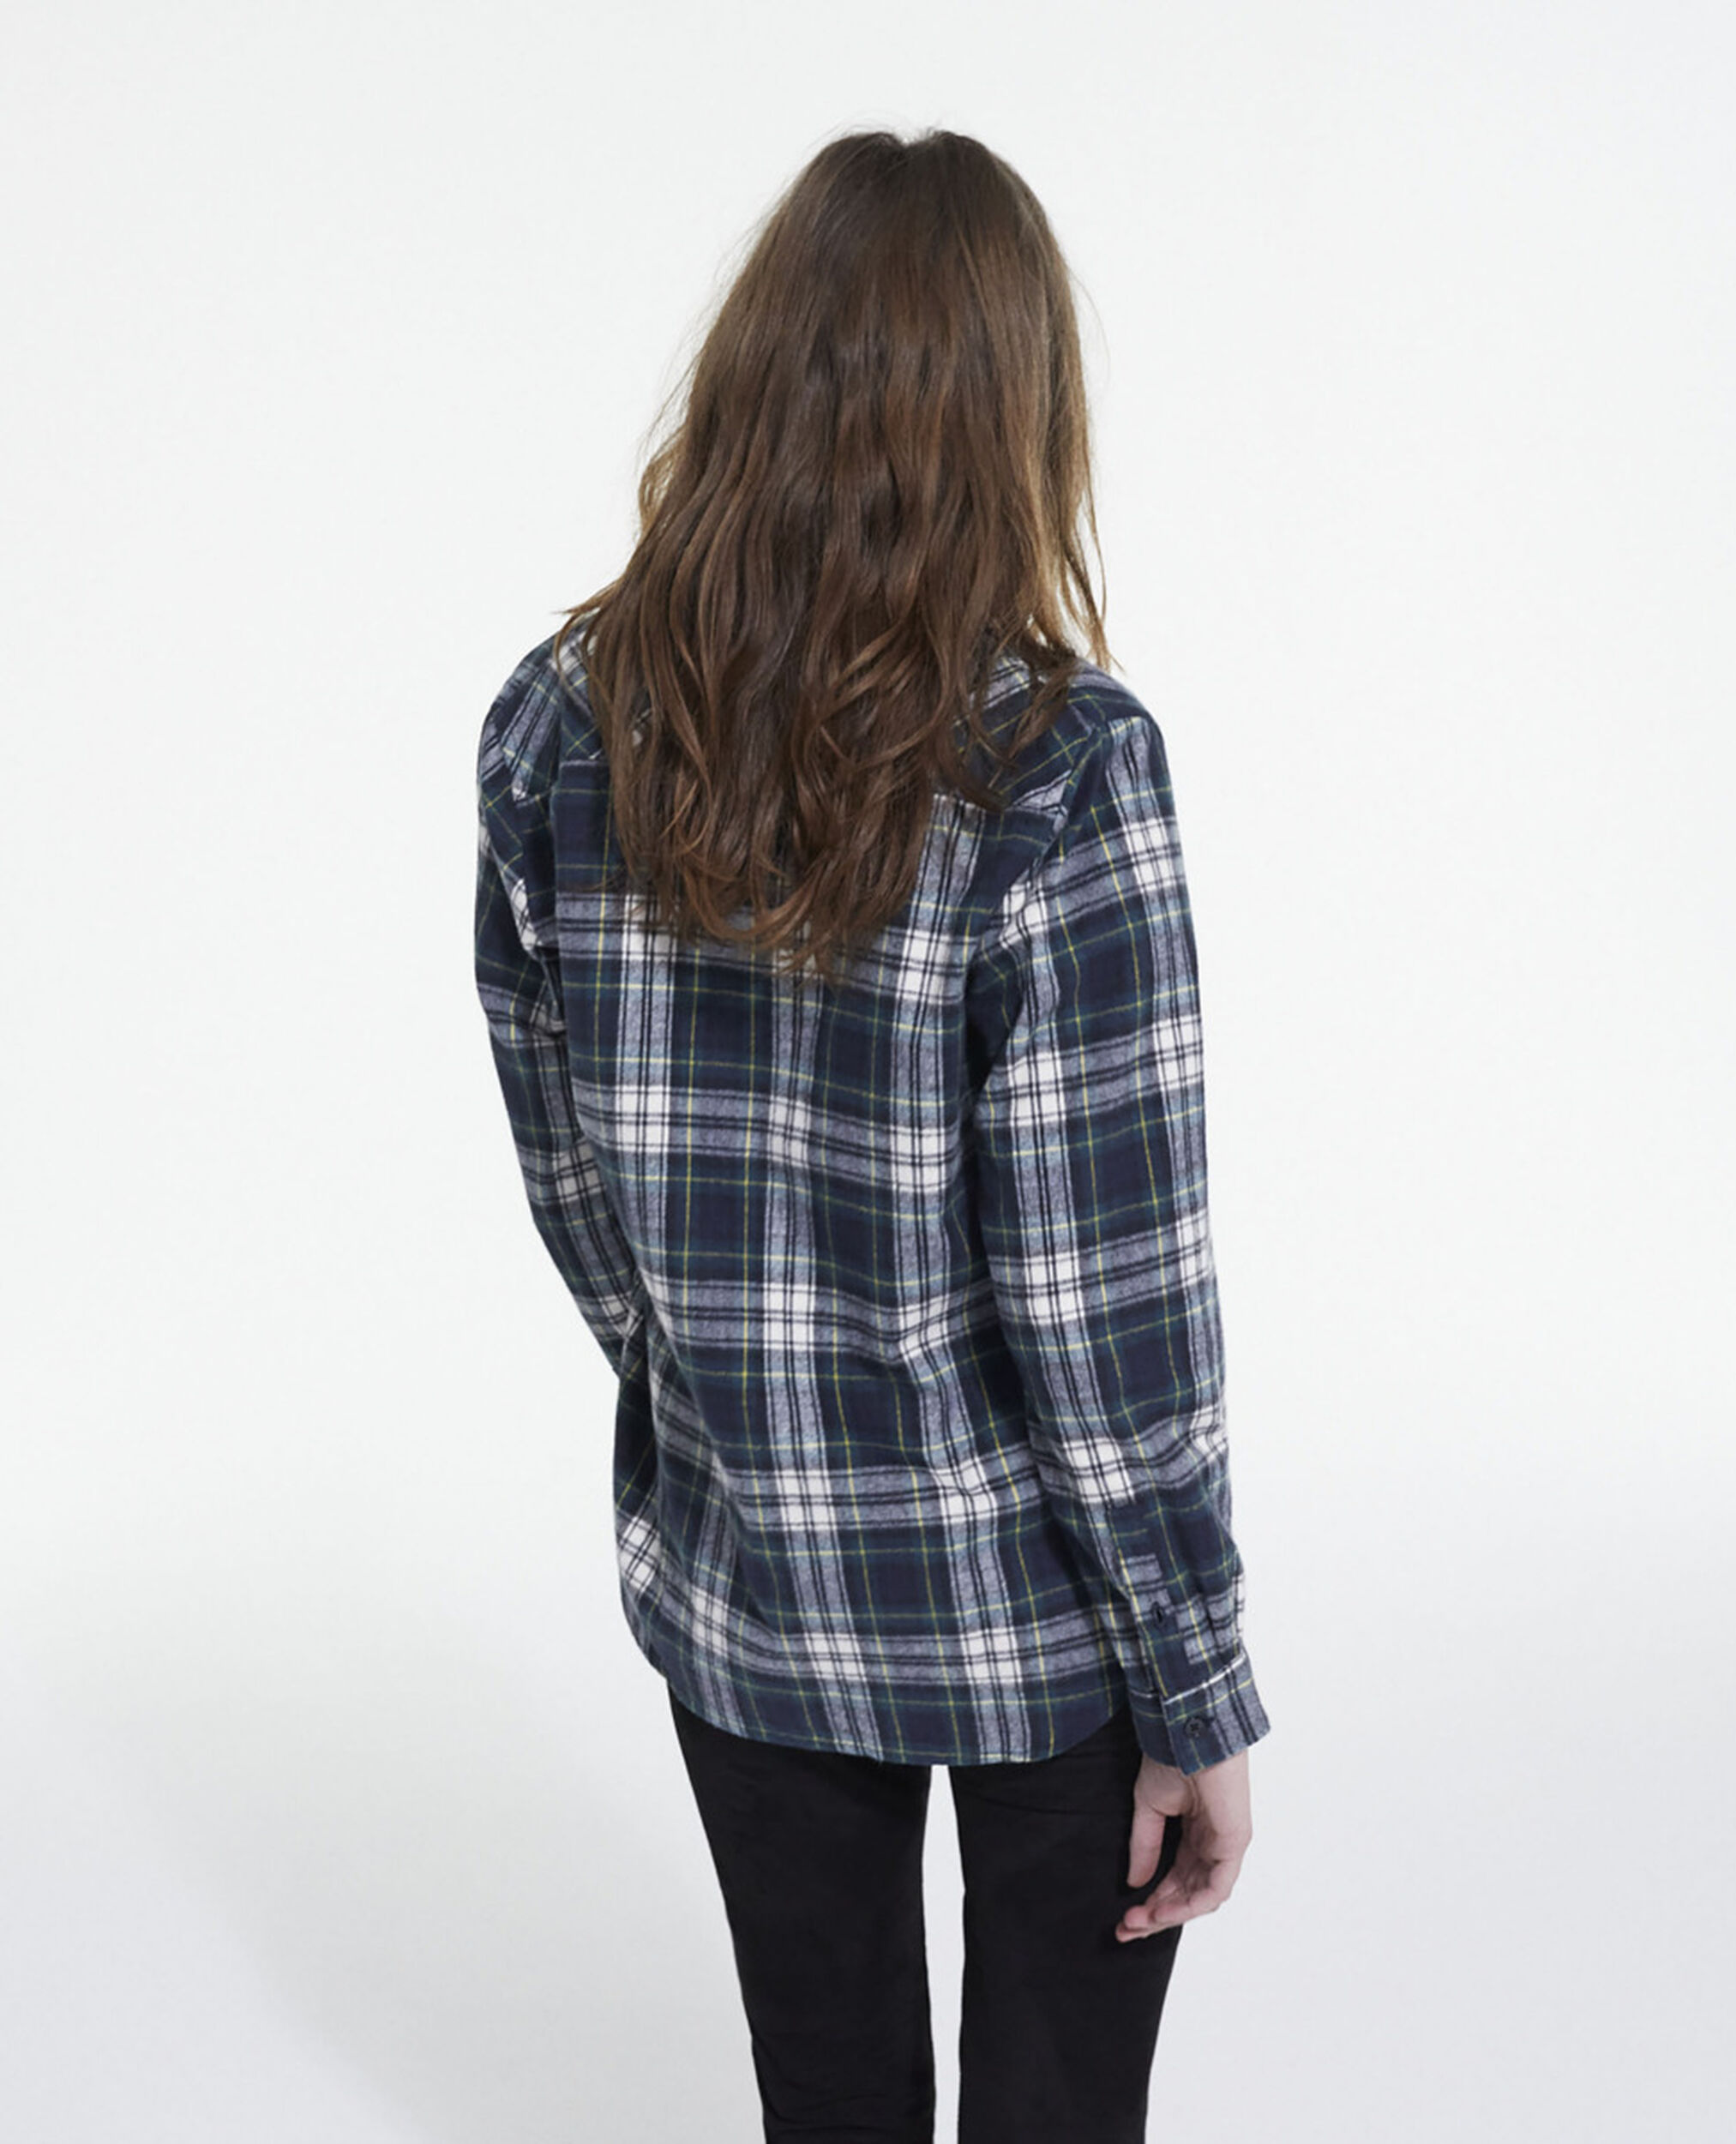 Overshirt with check motif, BOTTLE GREEN, hi-res image number null